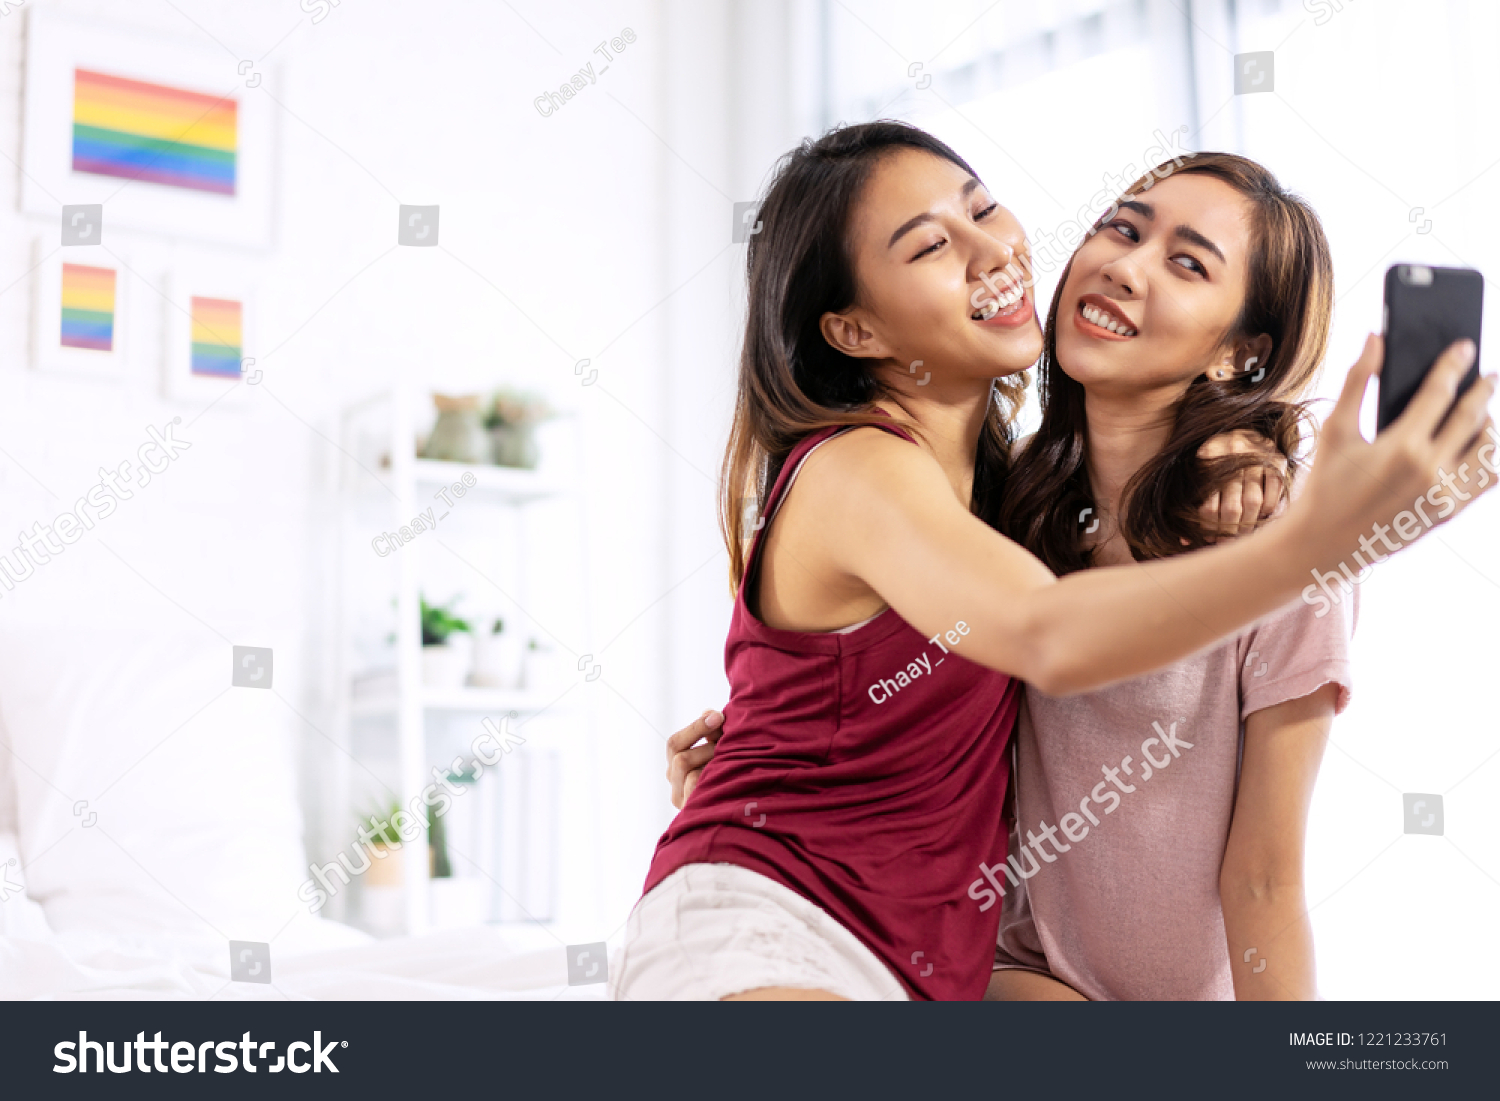 Clips Lesbian Download